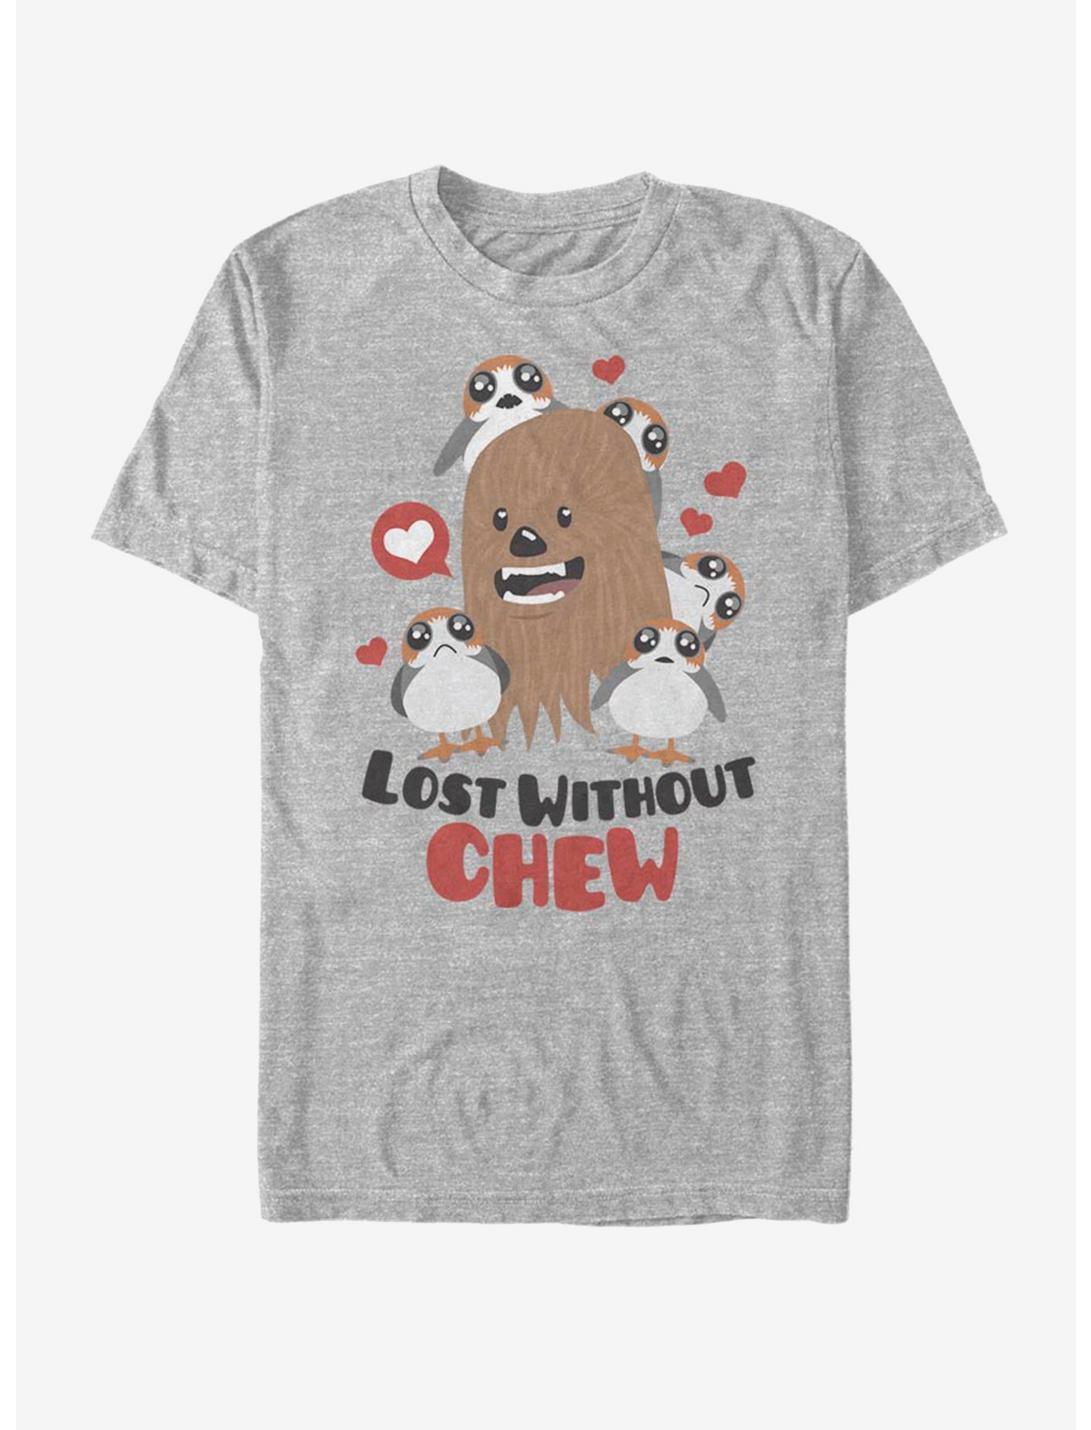 Star Wars Lost Without Chew T-Shirt, , hi-res